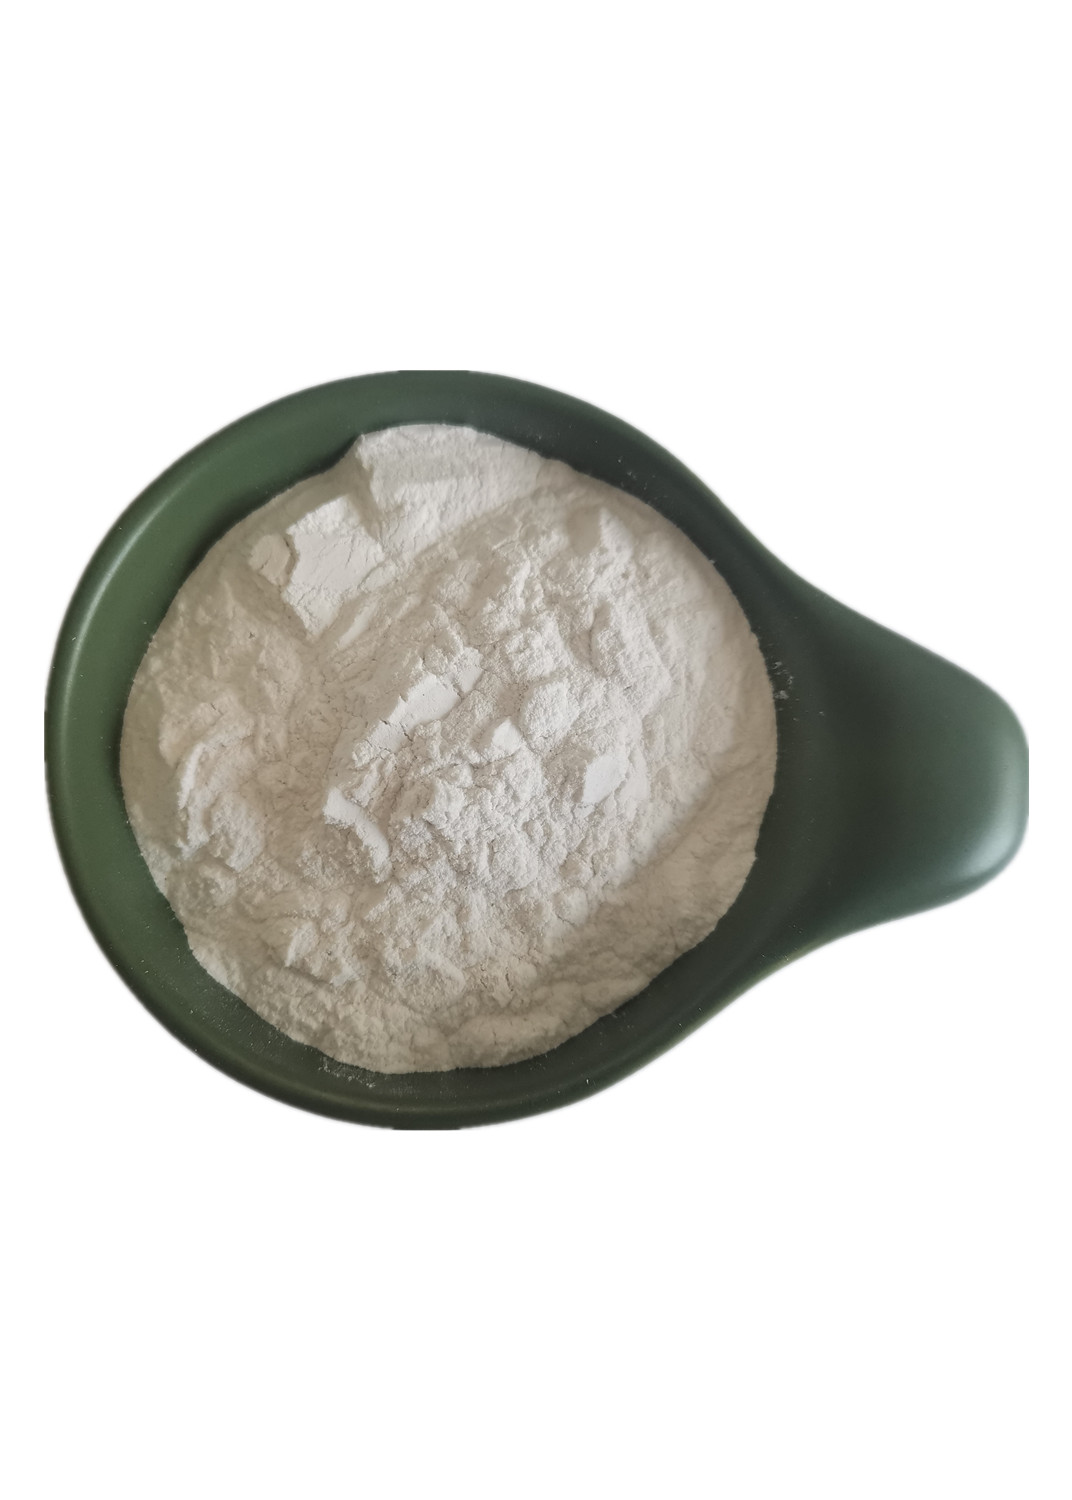 Best quality Kieselguhr Food Grade - Diatomite Earth Powder Wholesale Price Manufacturer Direct Supply for Filter Use Free Samples – Yuantong